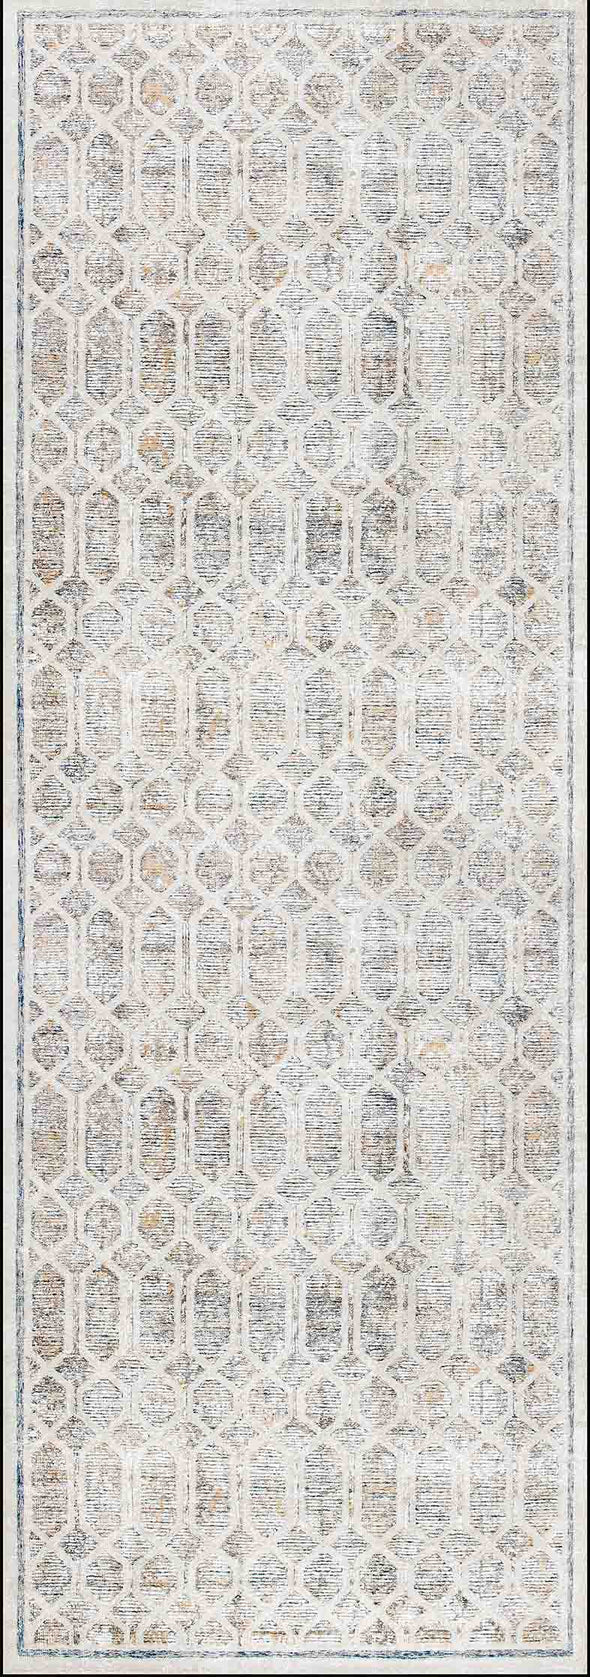 Chantilly Lace Multicolour Runner Rug